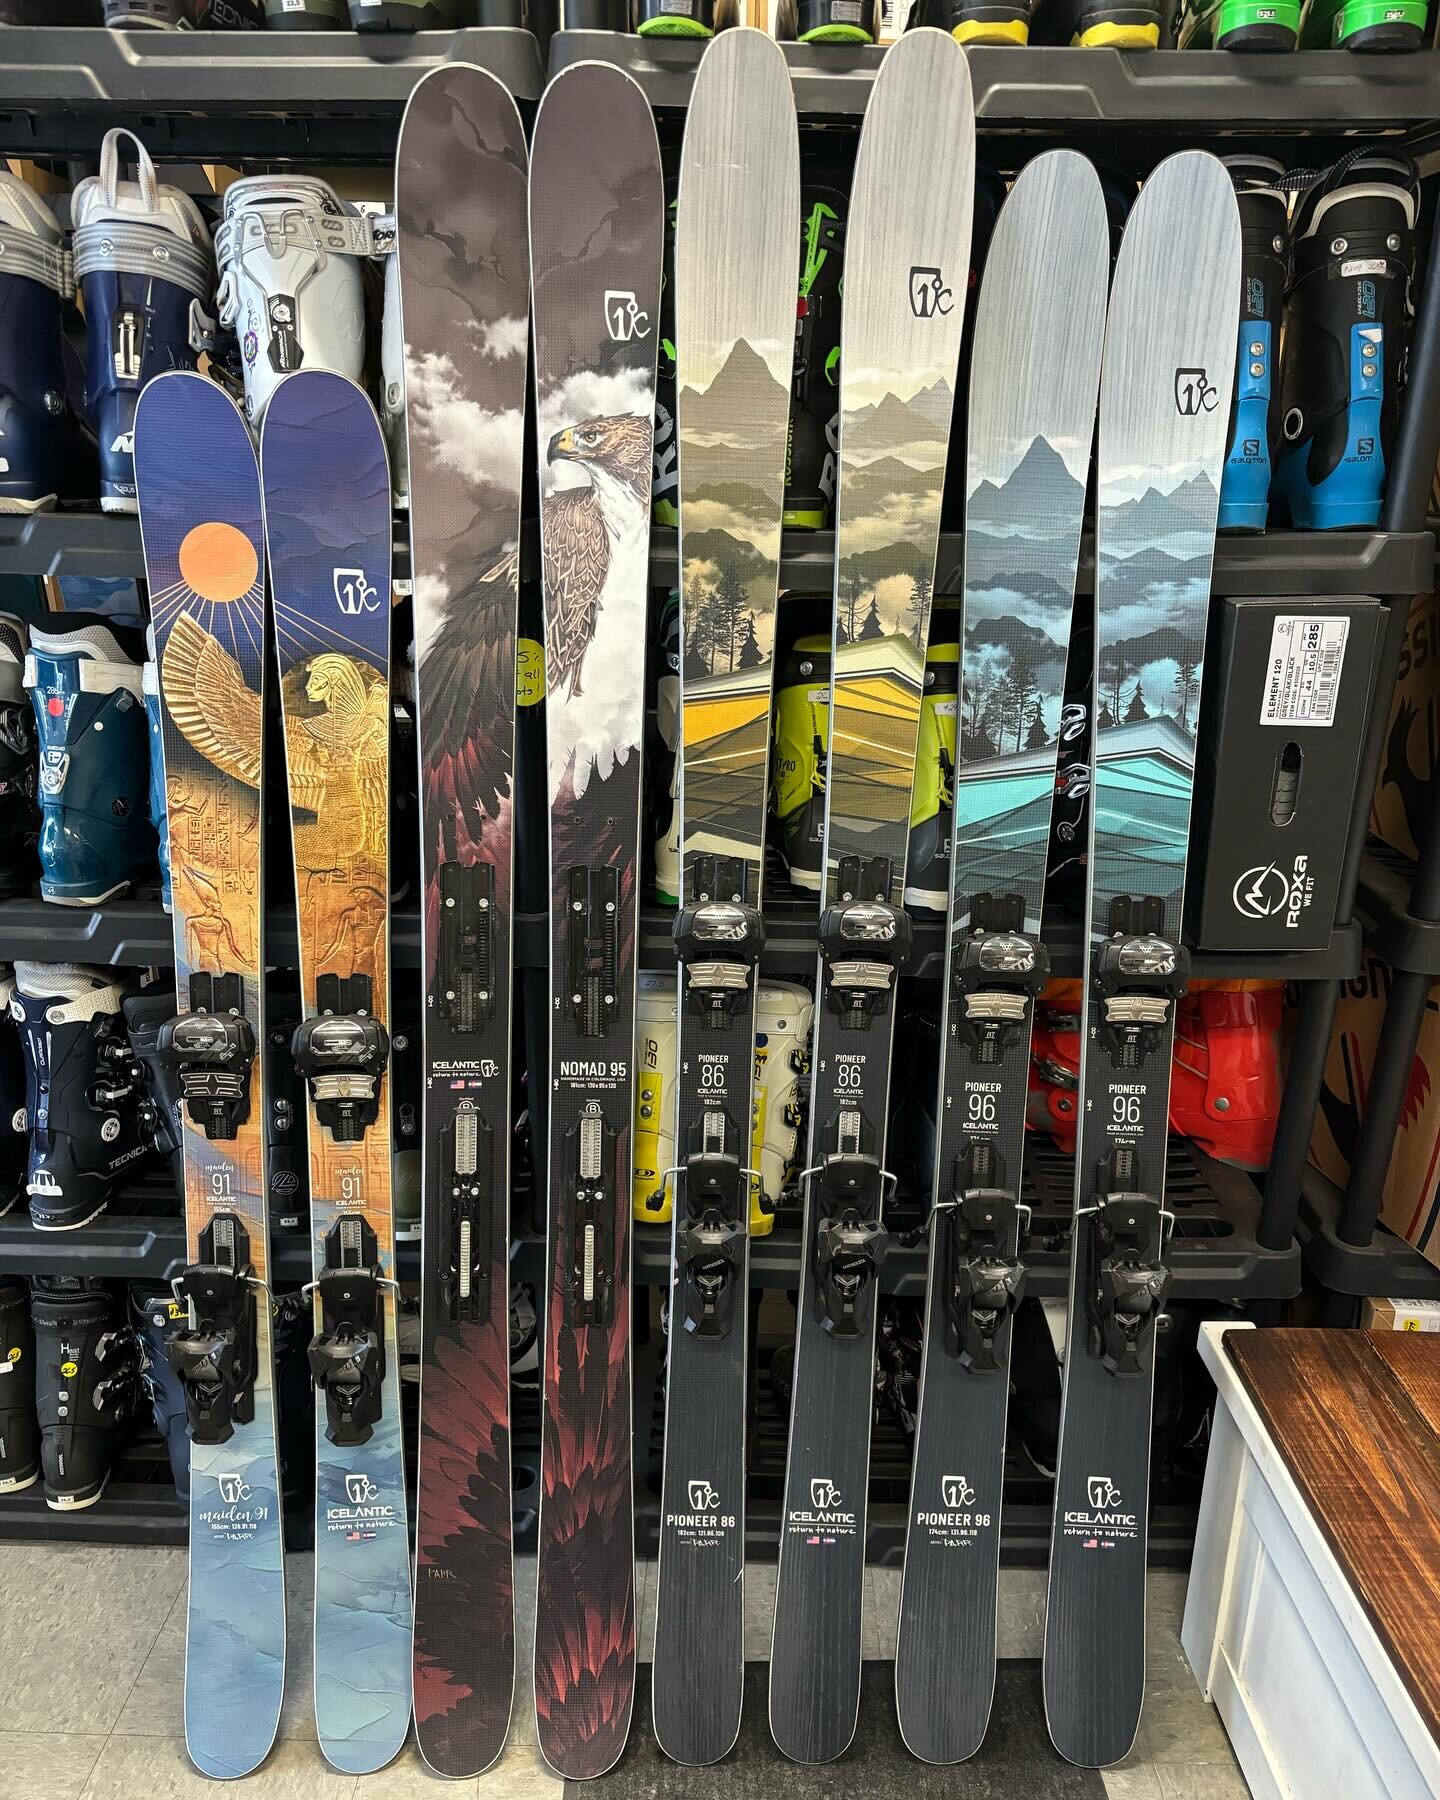 We just got our hands on some @icelantic_skis demos! Come try them out at $59/day or $99 for two day. If you choose to purchase a pair, the amount you spend comes off the sale price!